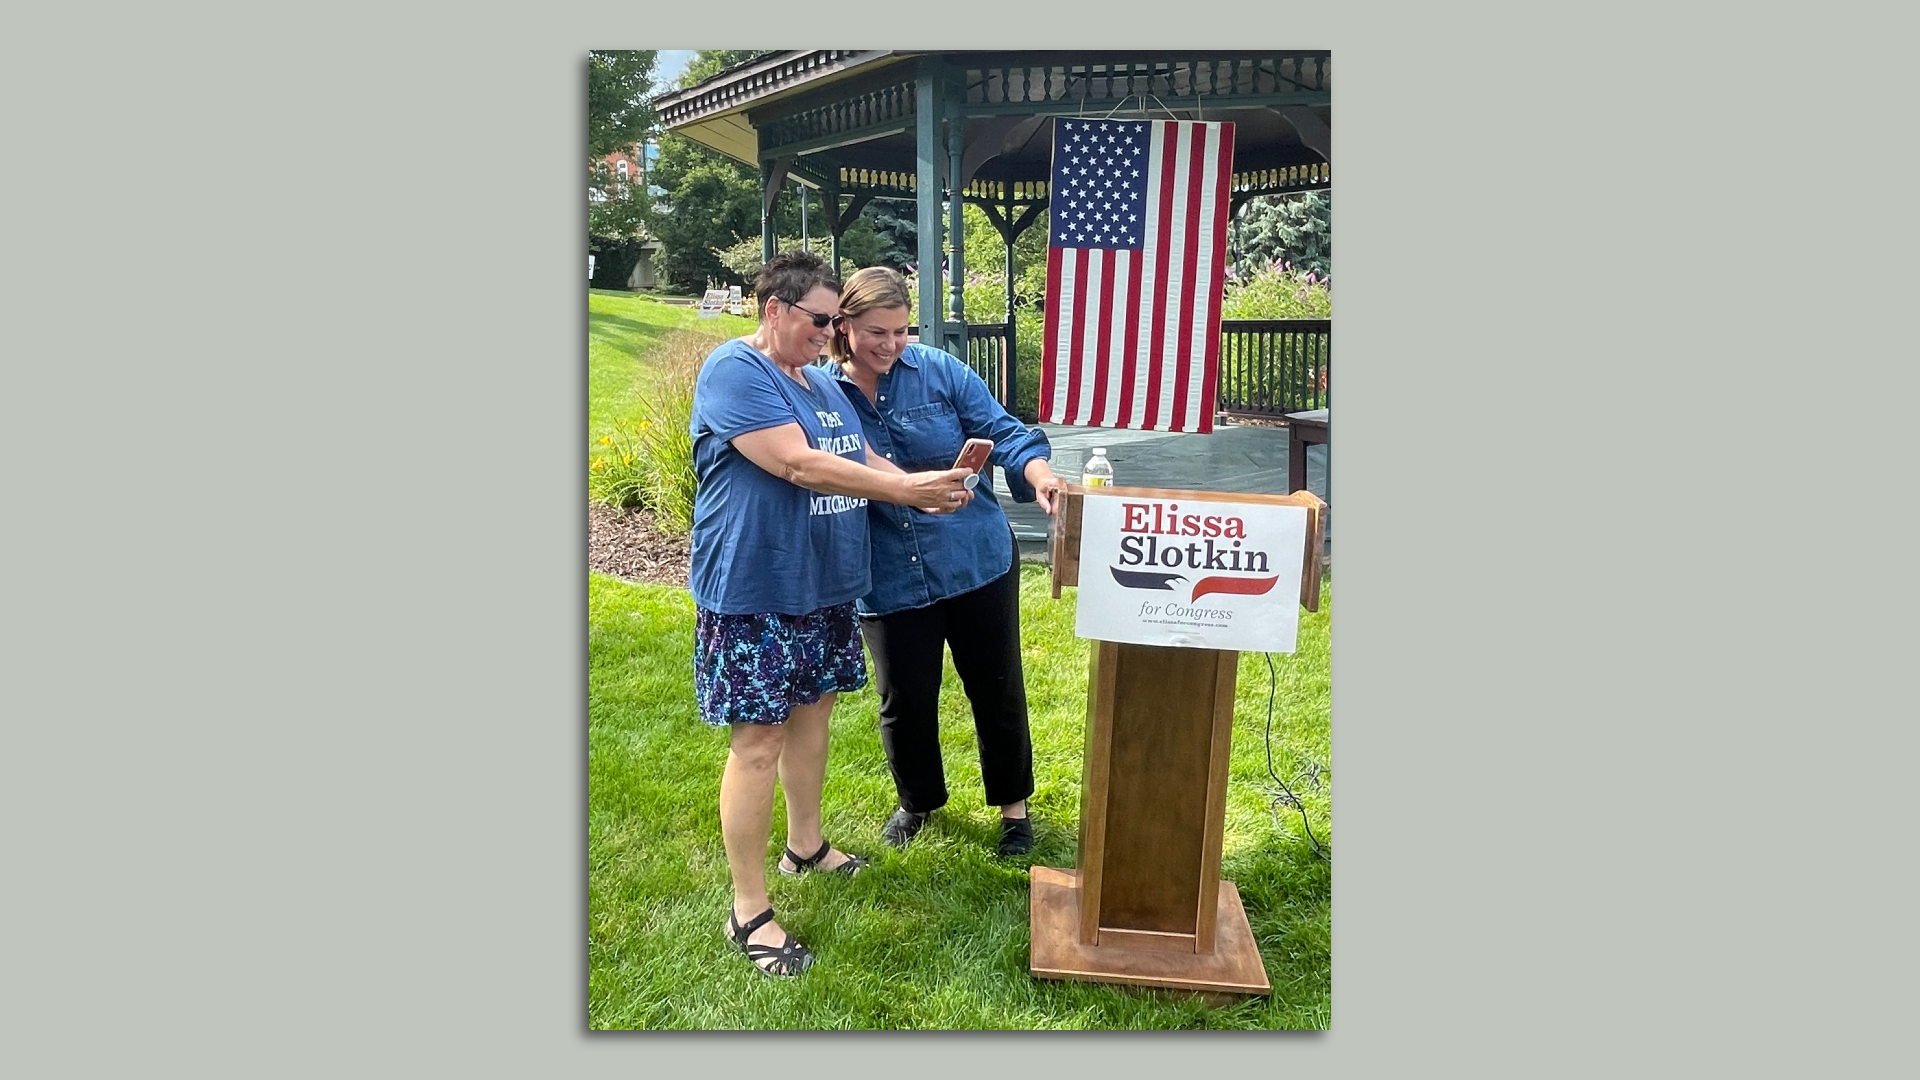 Elissa Slotkin with a supporter in Michigan